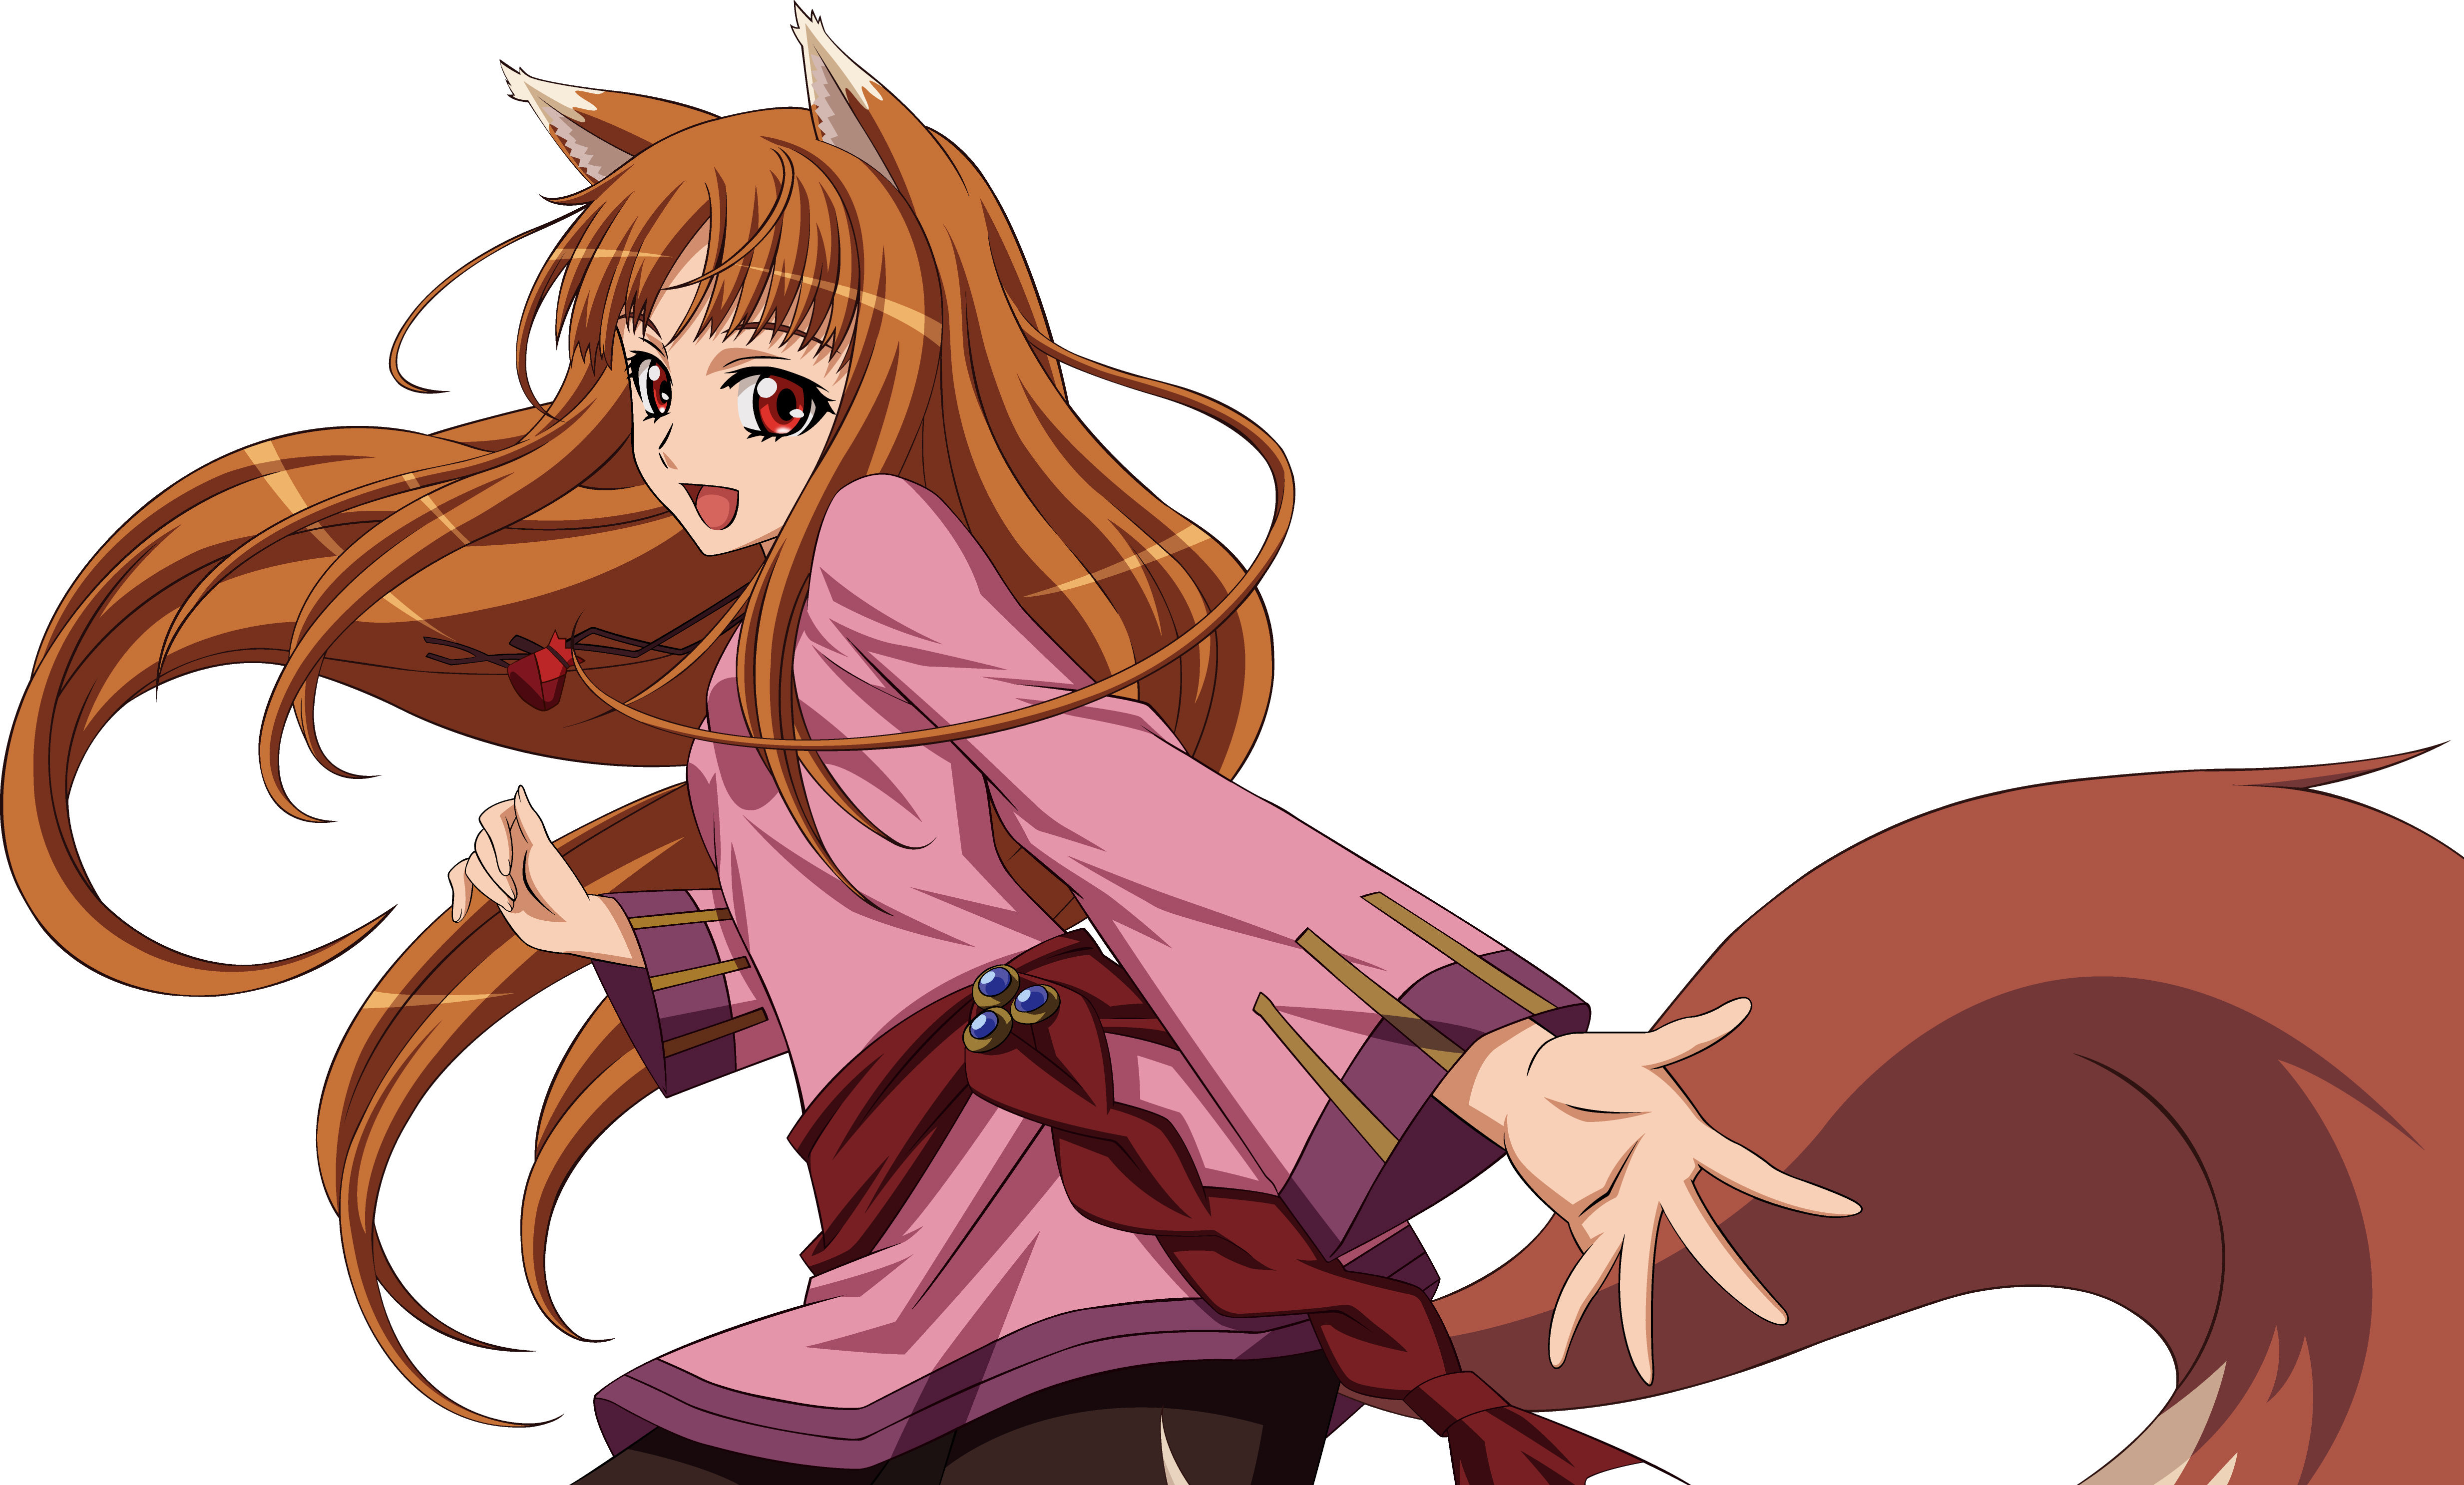 Spice And Wolf Horo Girl Wallpaper Hd Anime 4k Wallpapers Images Photos And Background Wallpapers Den